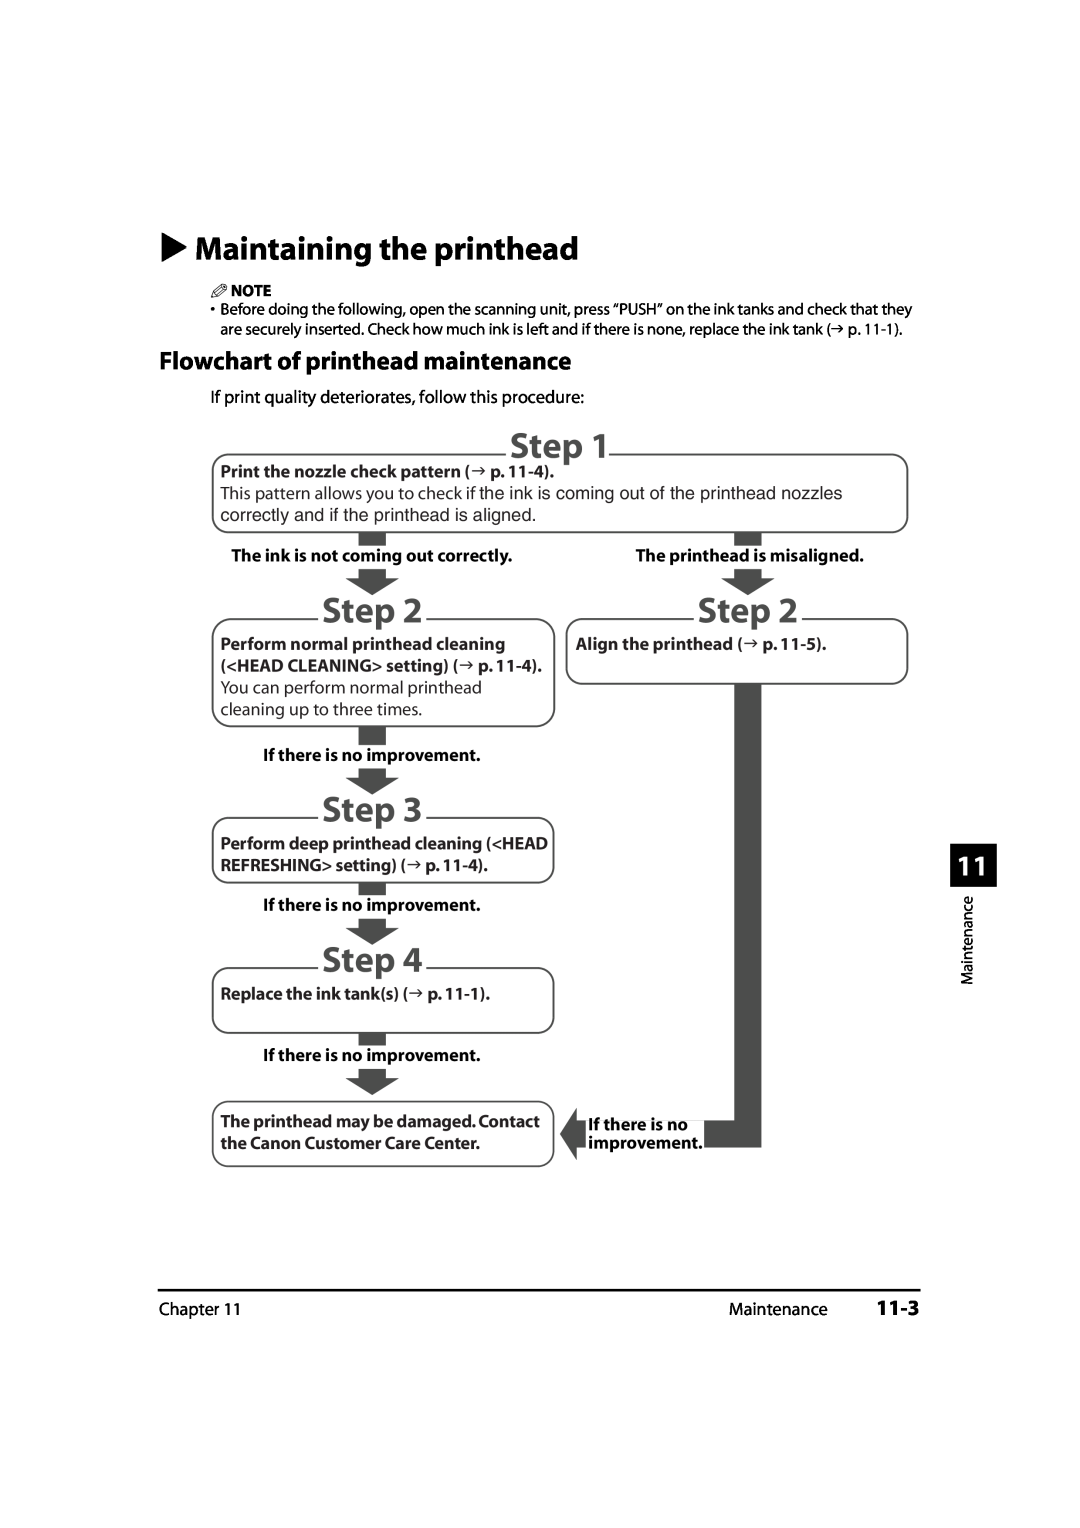 Canon 730i, MultiPASS MP730, MP700 Maintaining the printhead, Flowchart of printhead maintenance, 11-3, Step, out correctly 